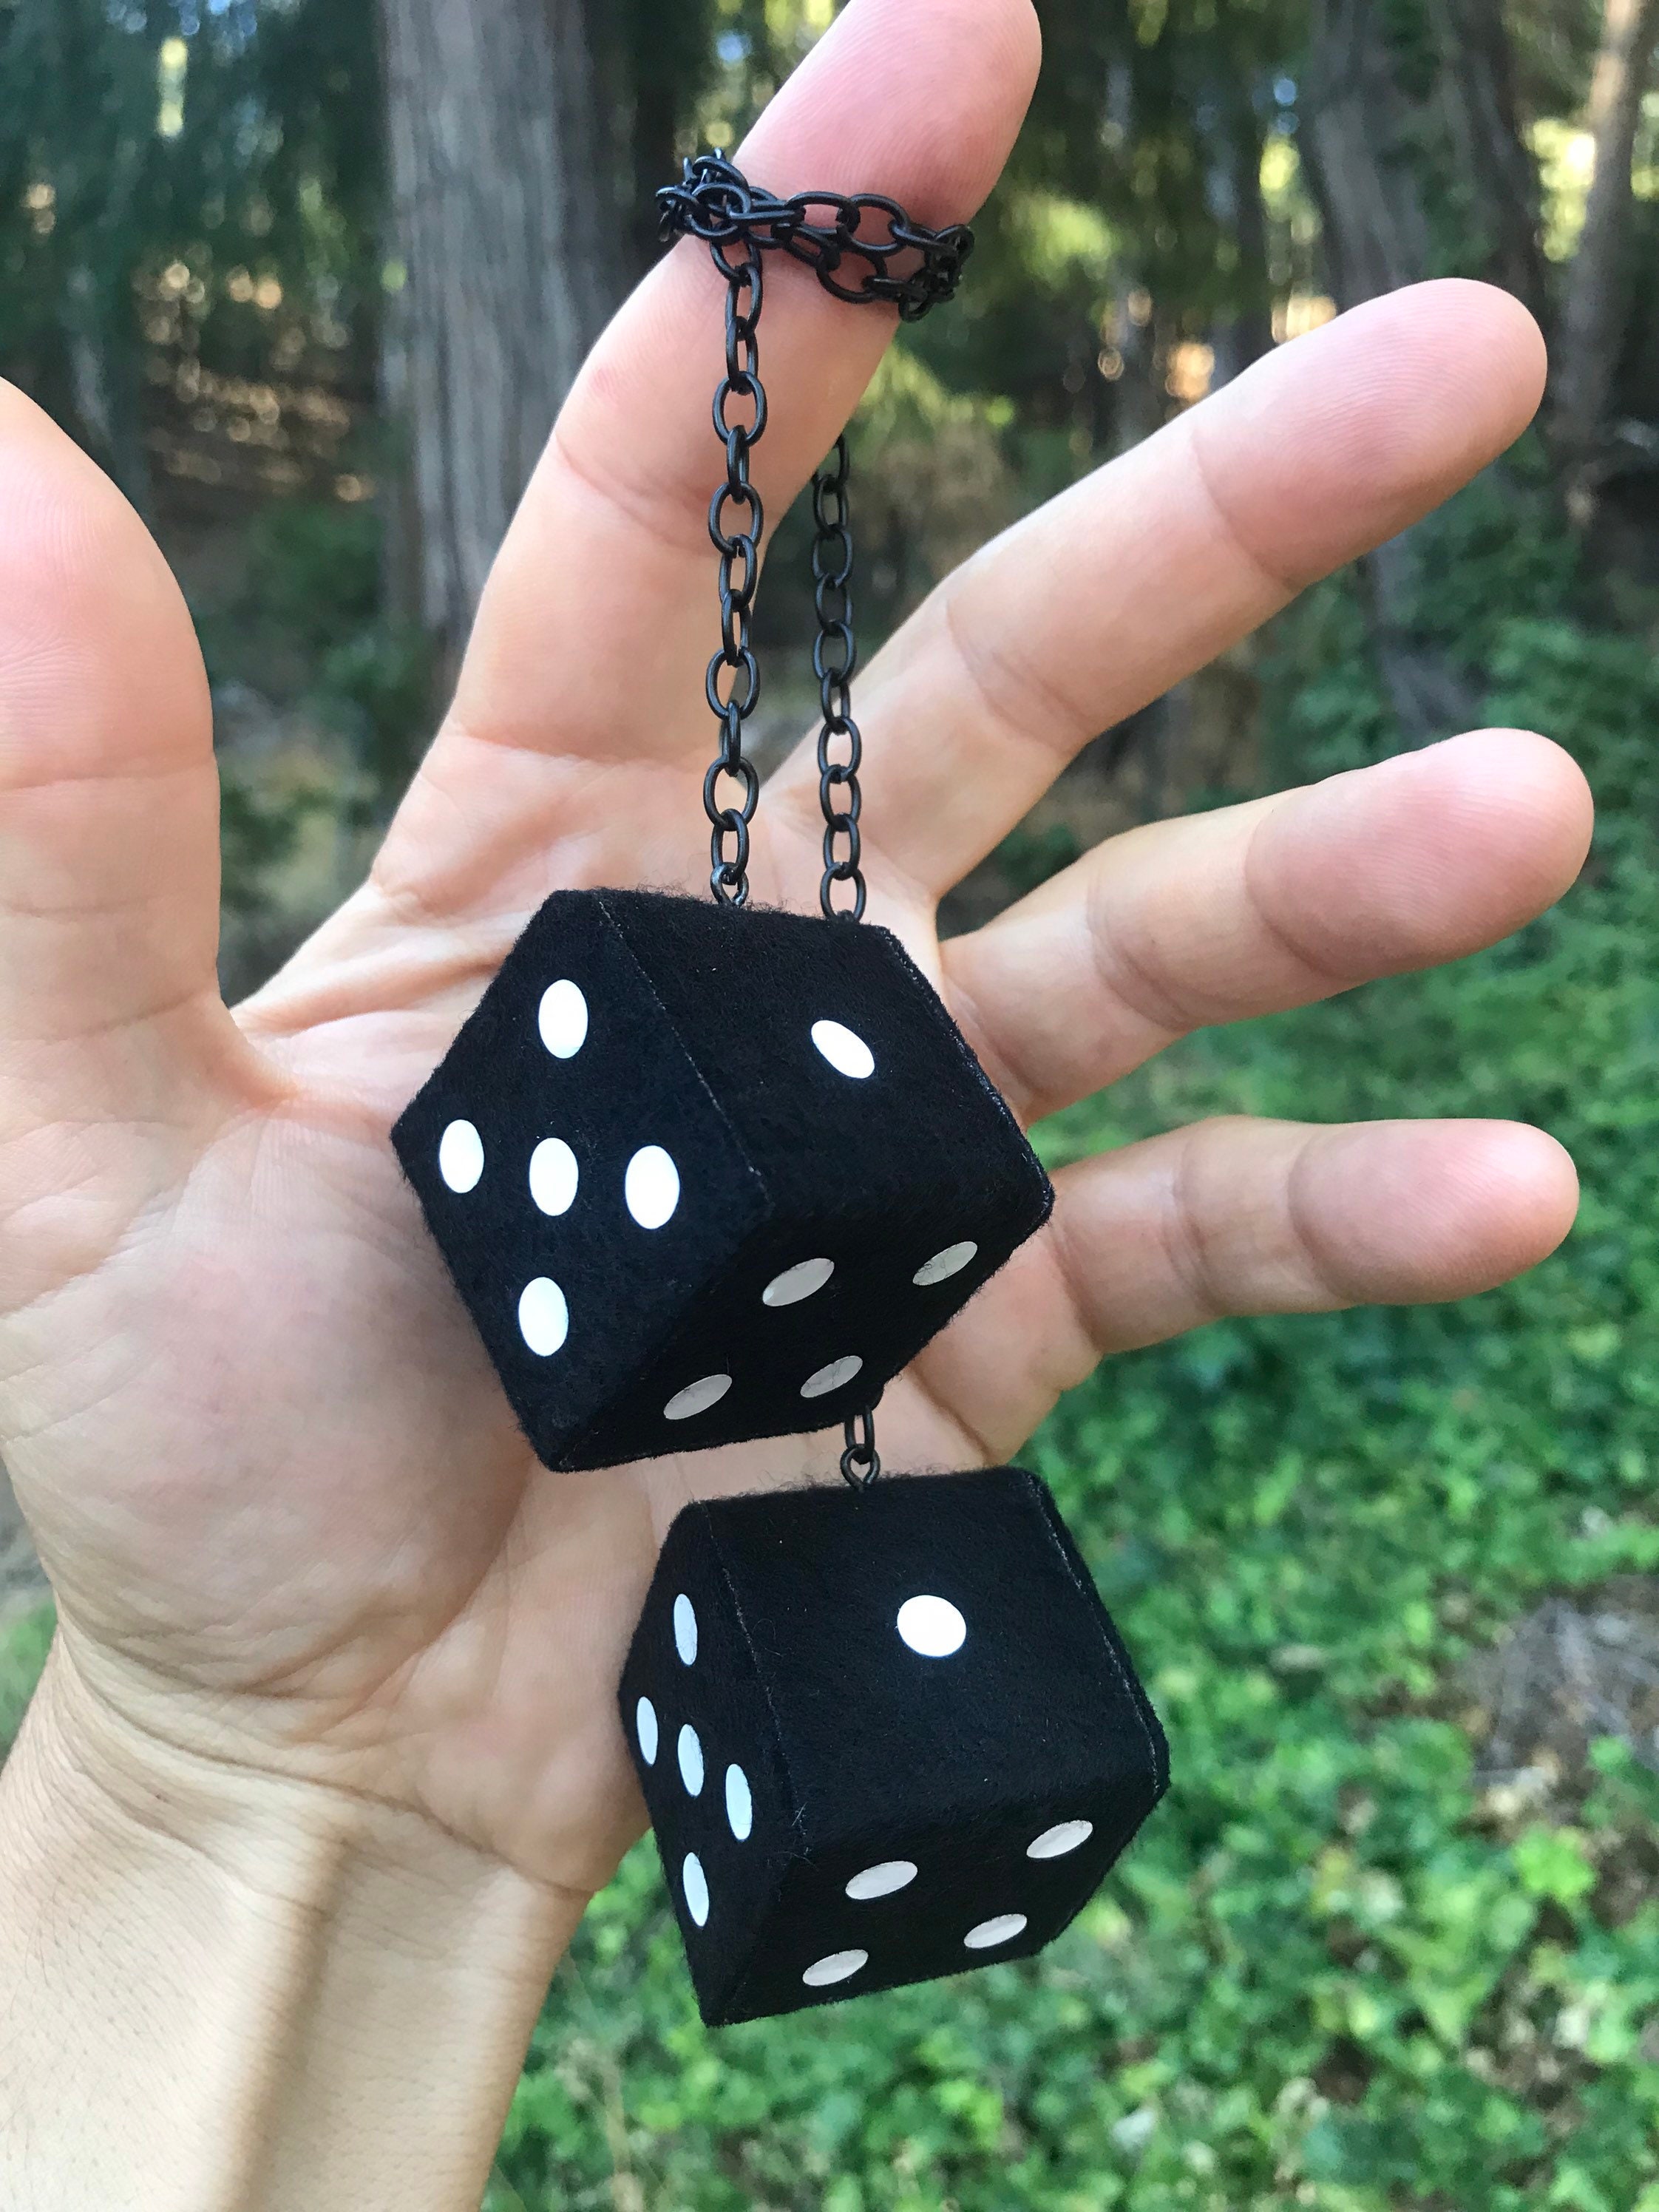 Black Fuzzy Dice With Metallic Gold Dots and Chain or Cord / Car Accessories,  Charms, Gift, Novelty, Mirror Danglers, Car Dice, Car Charm 